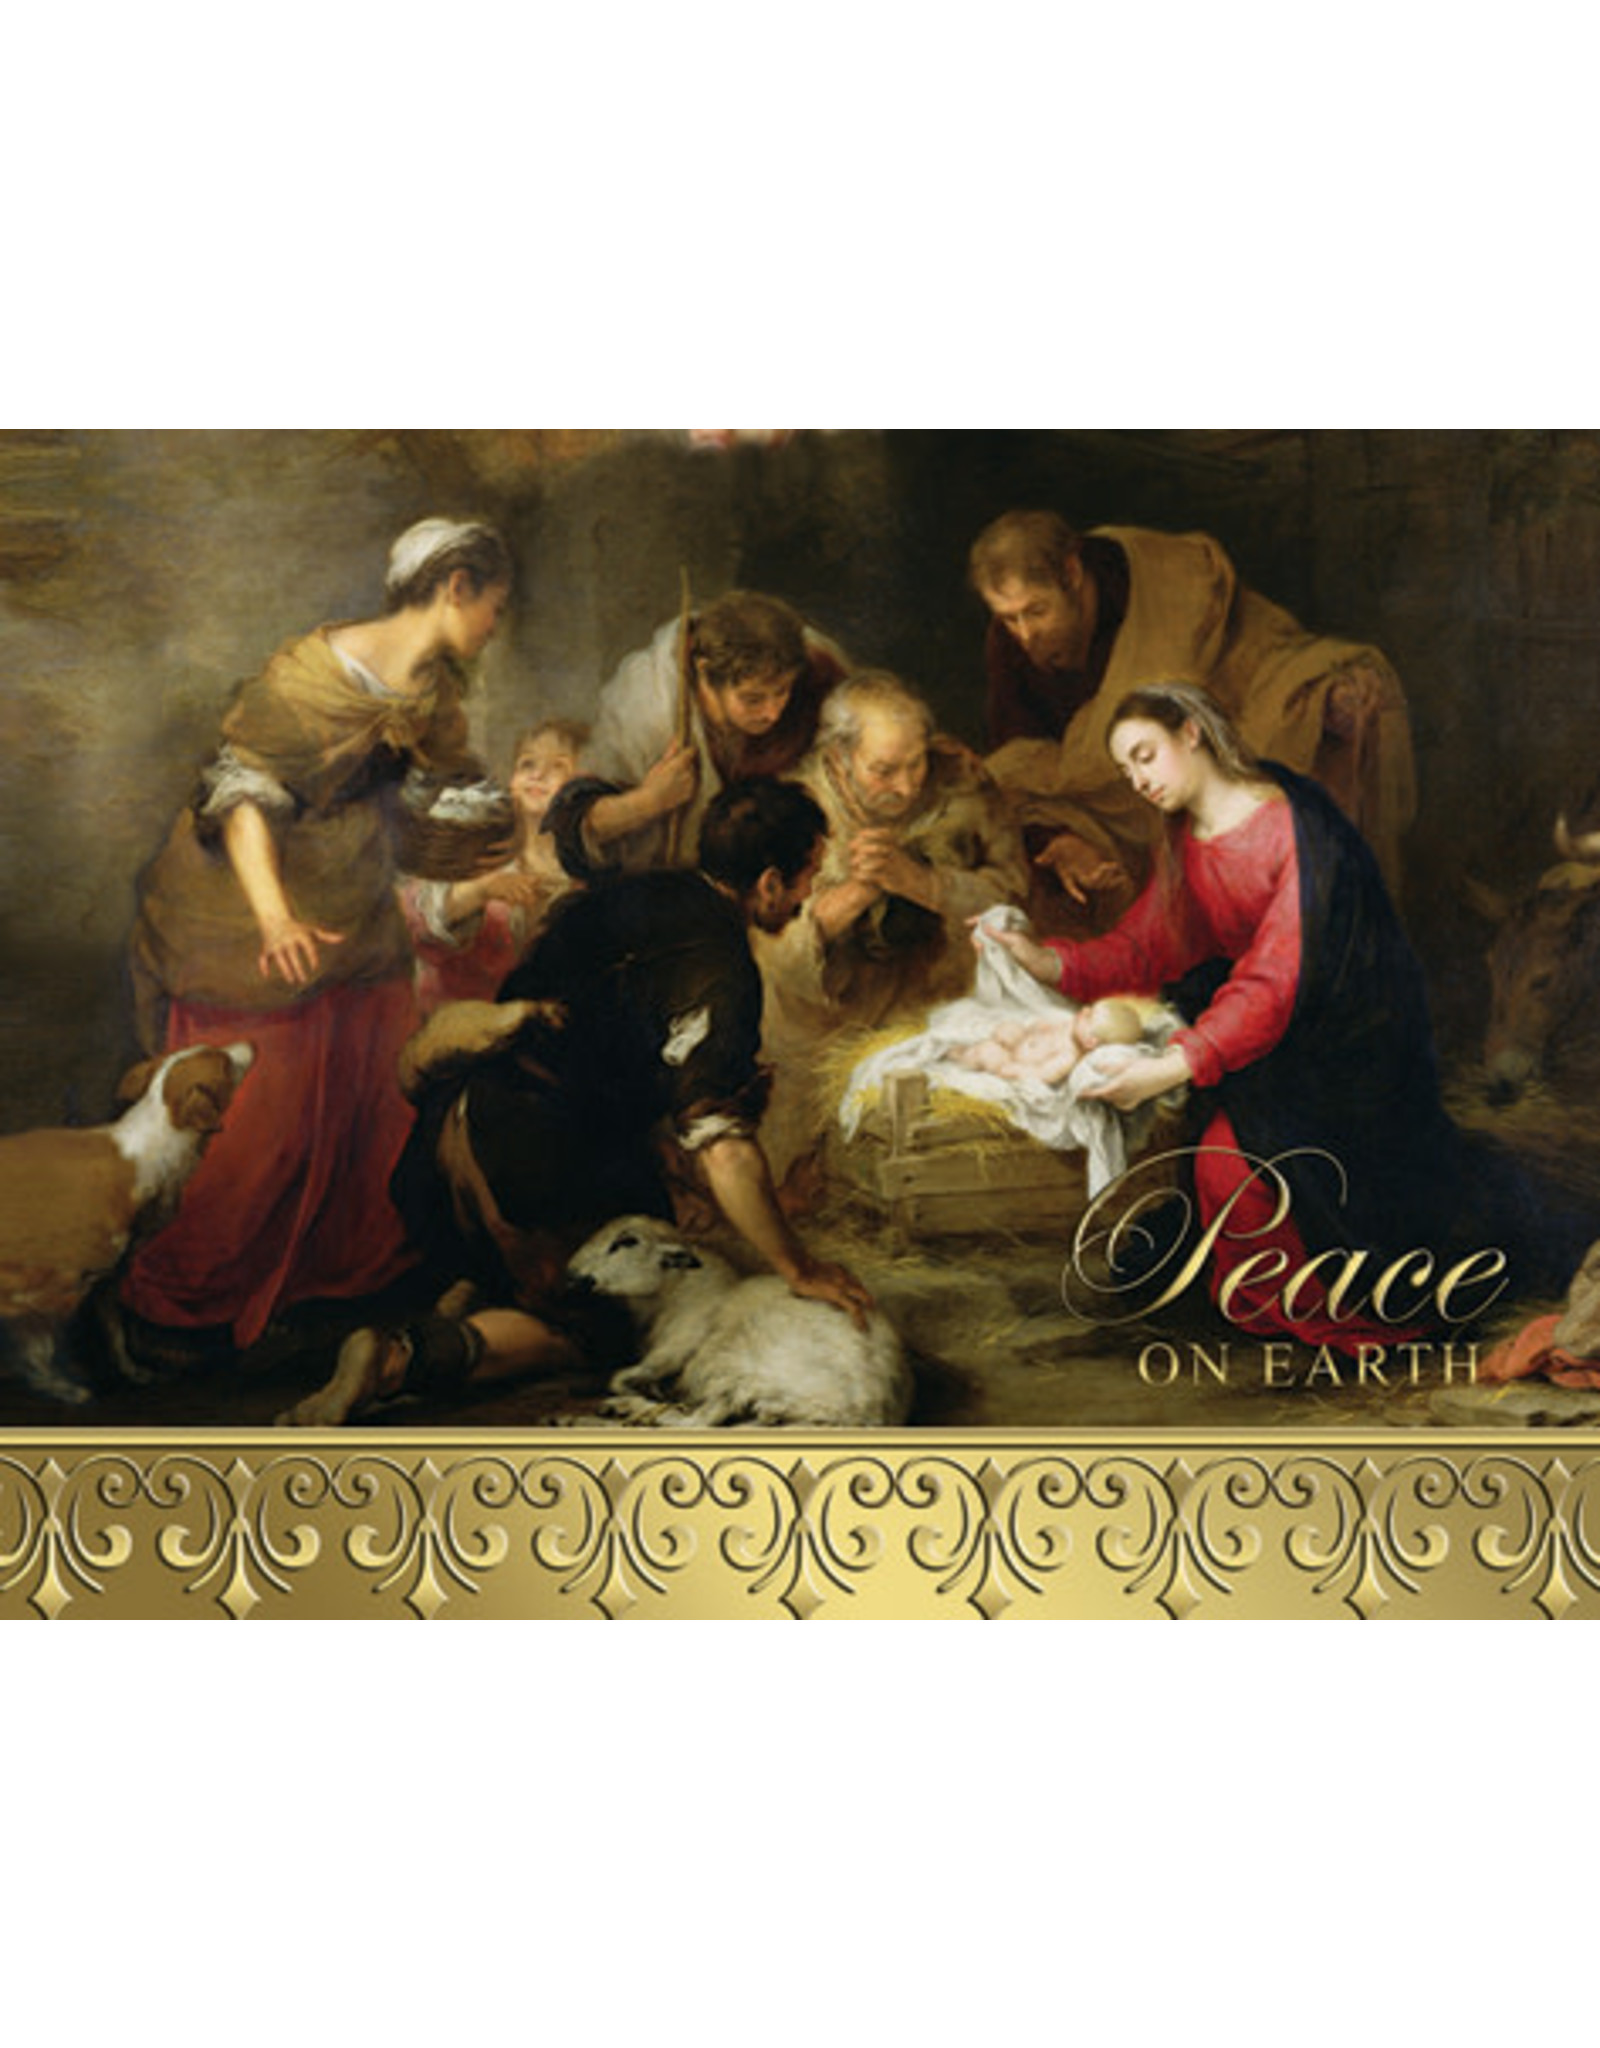 Barton Cotton Boxed Christmas Cards from Priest - Peace on Earth (50)